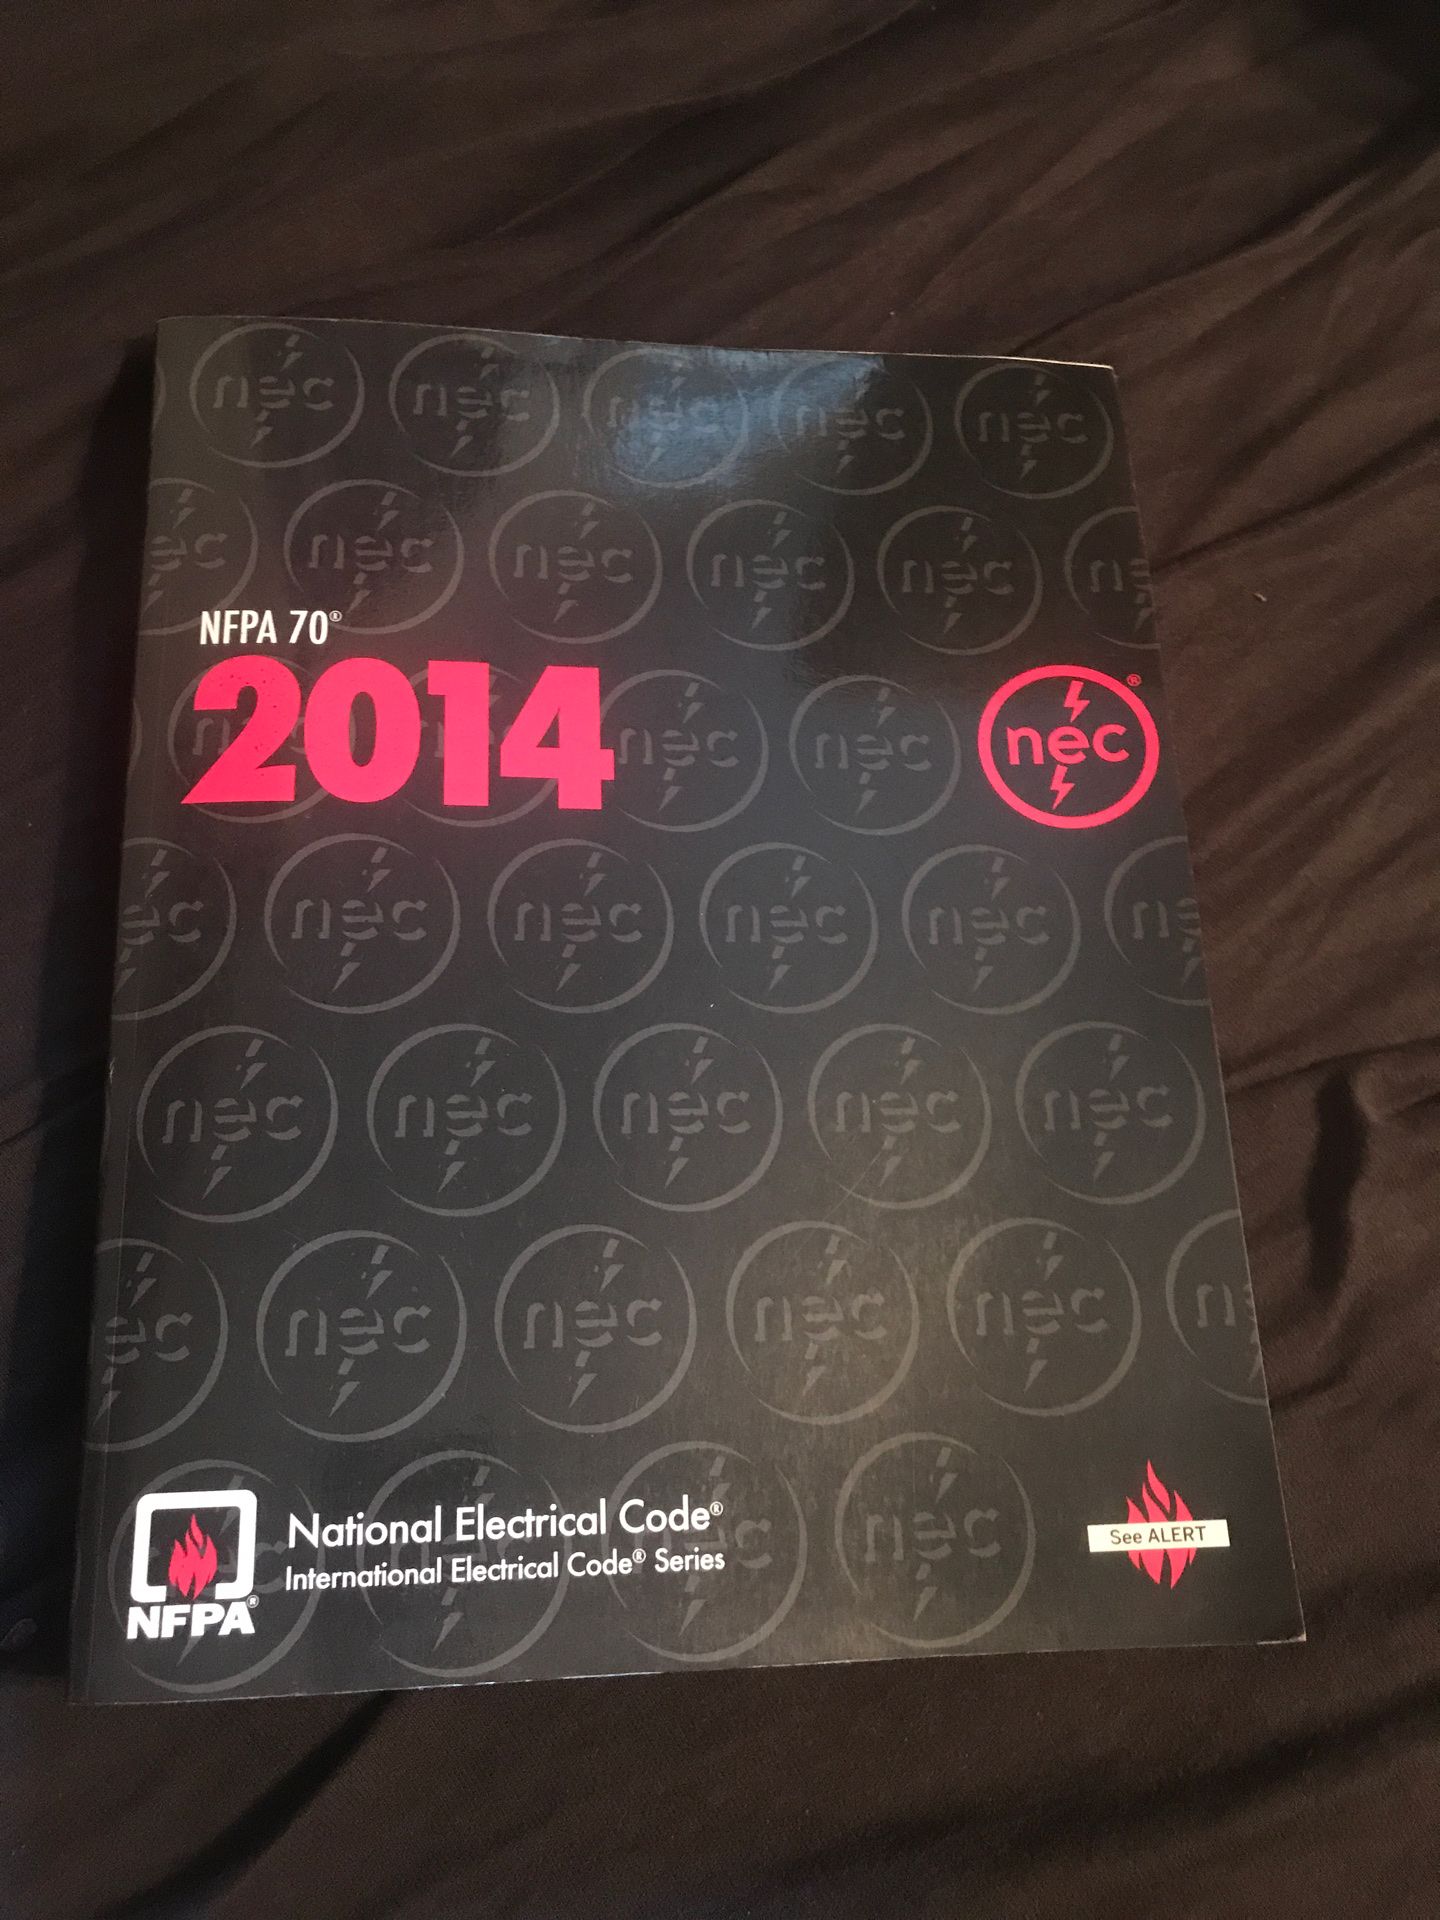 NEC2014 Nfpa work book for electrical code